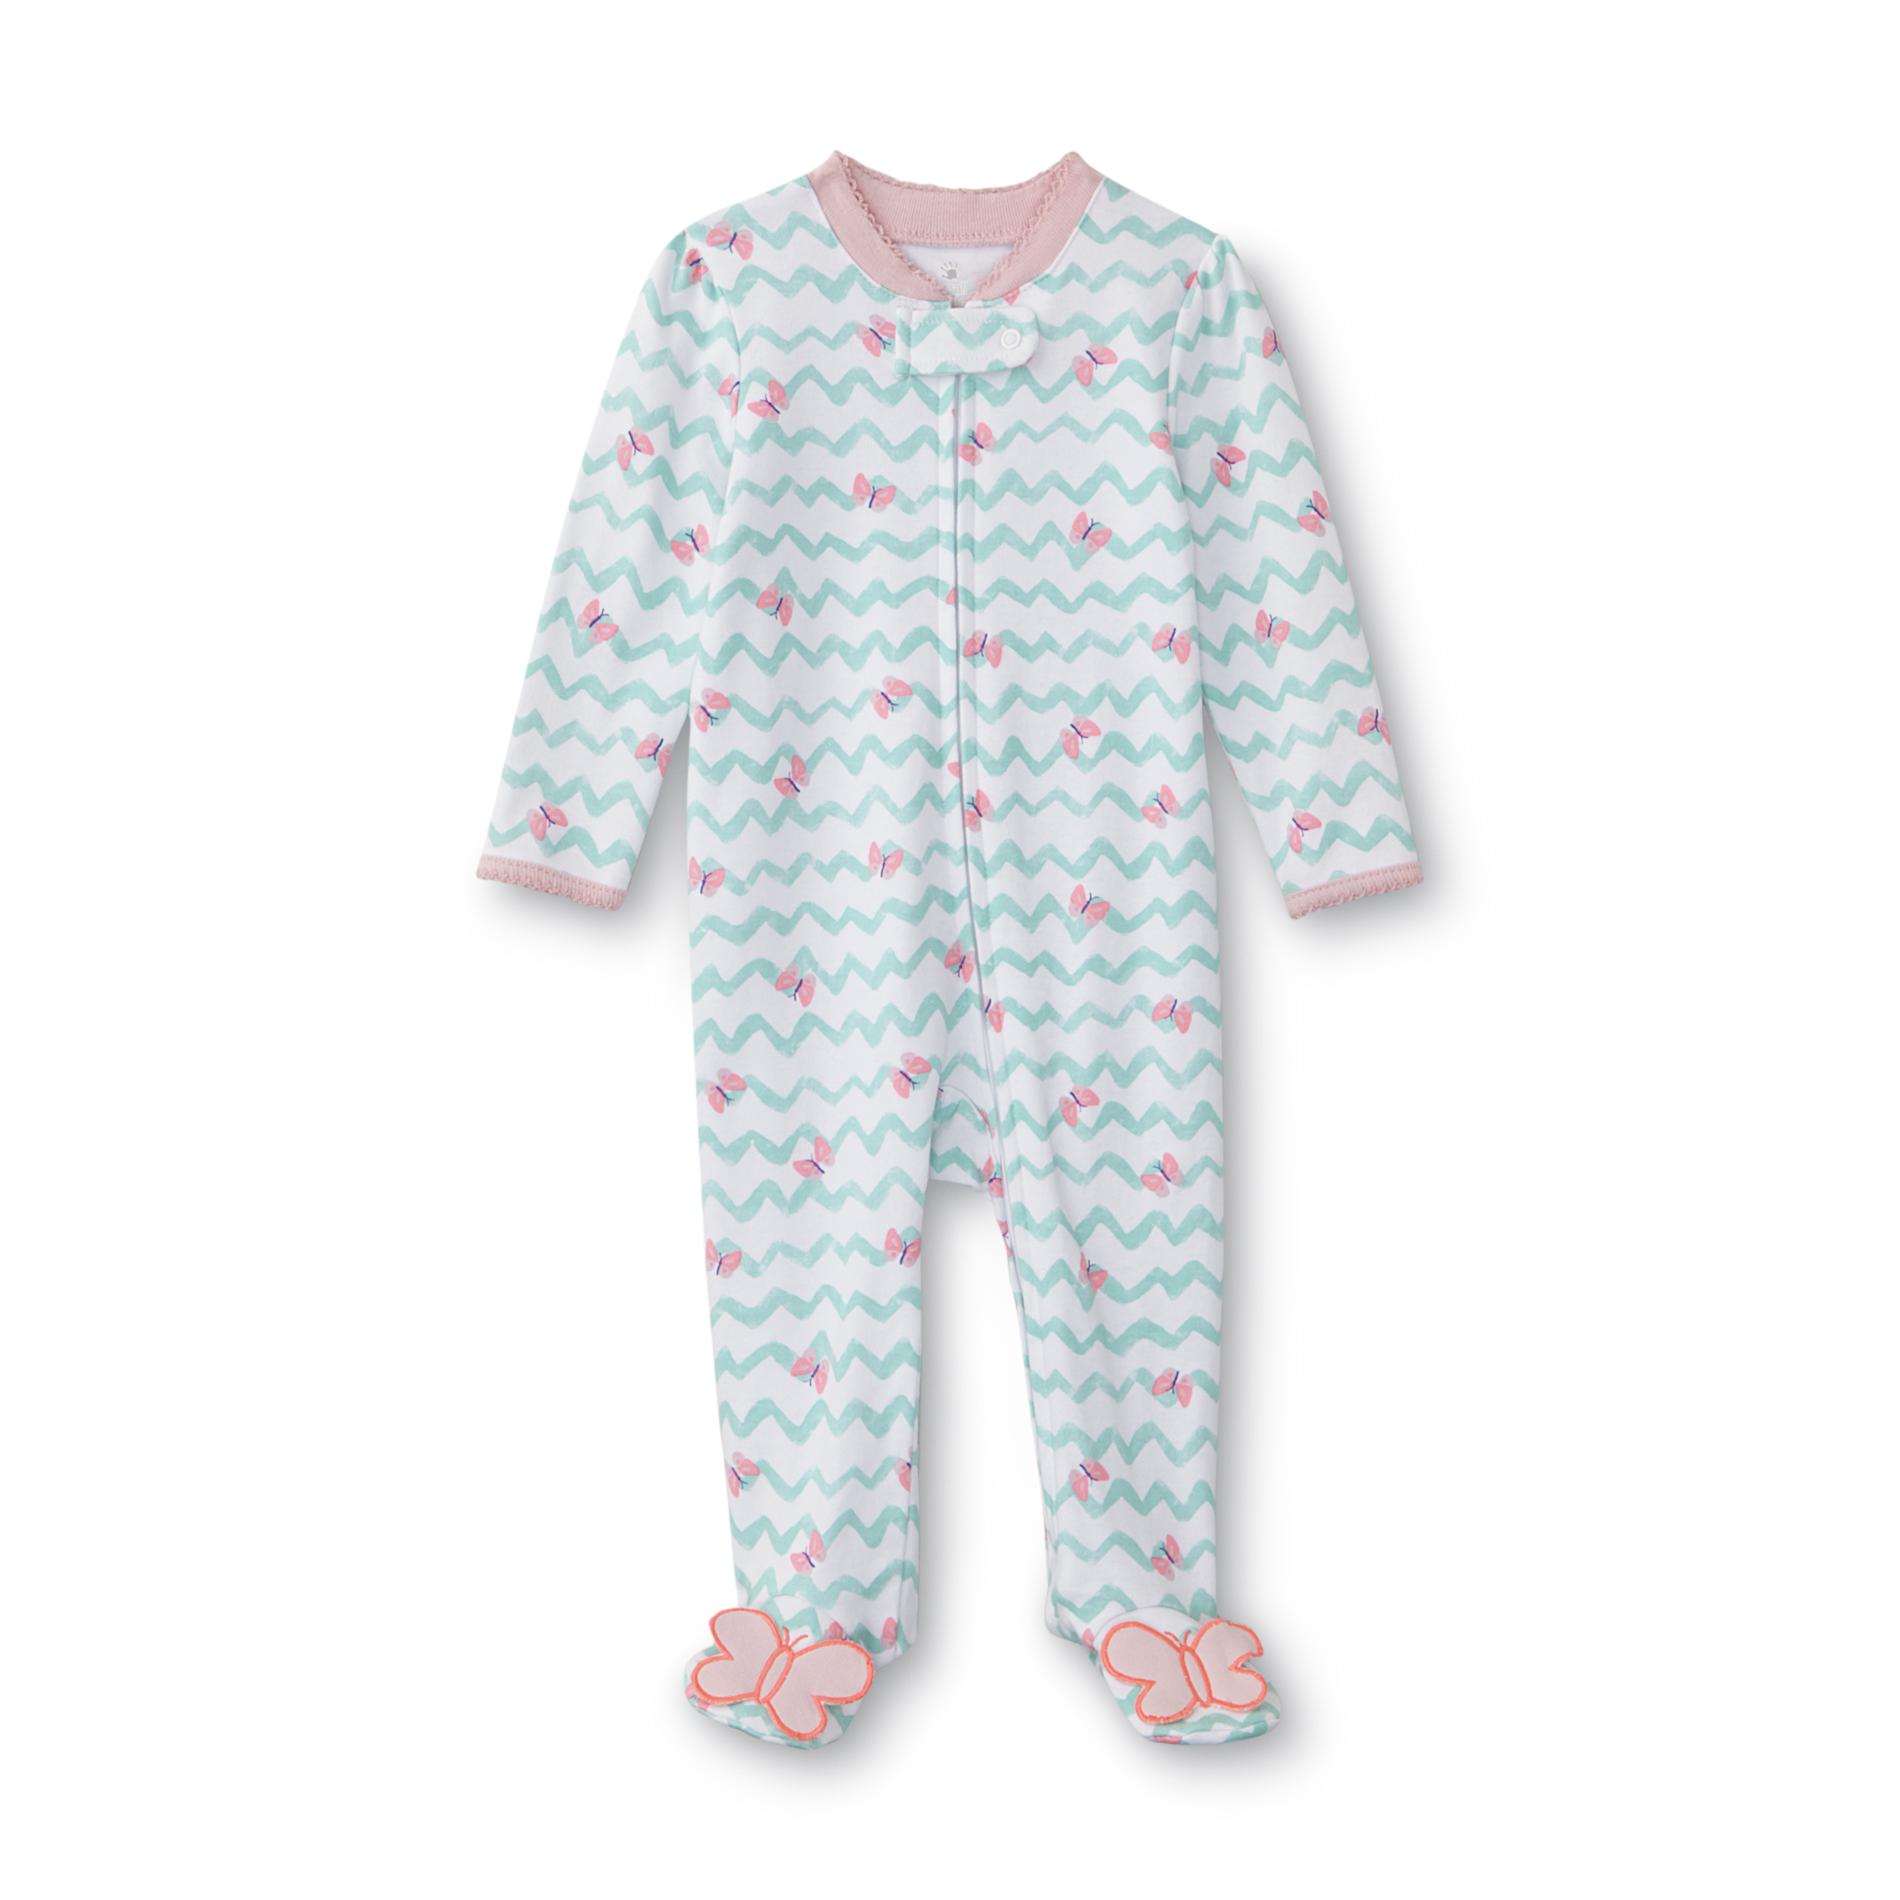 Newborn Girl's Footed Pajamas - Butterfly